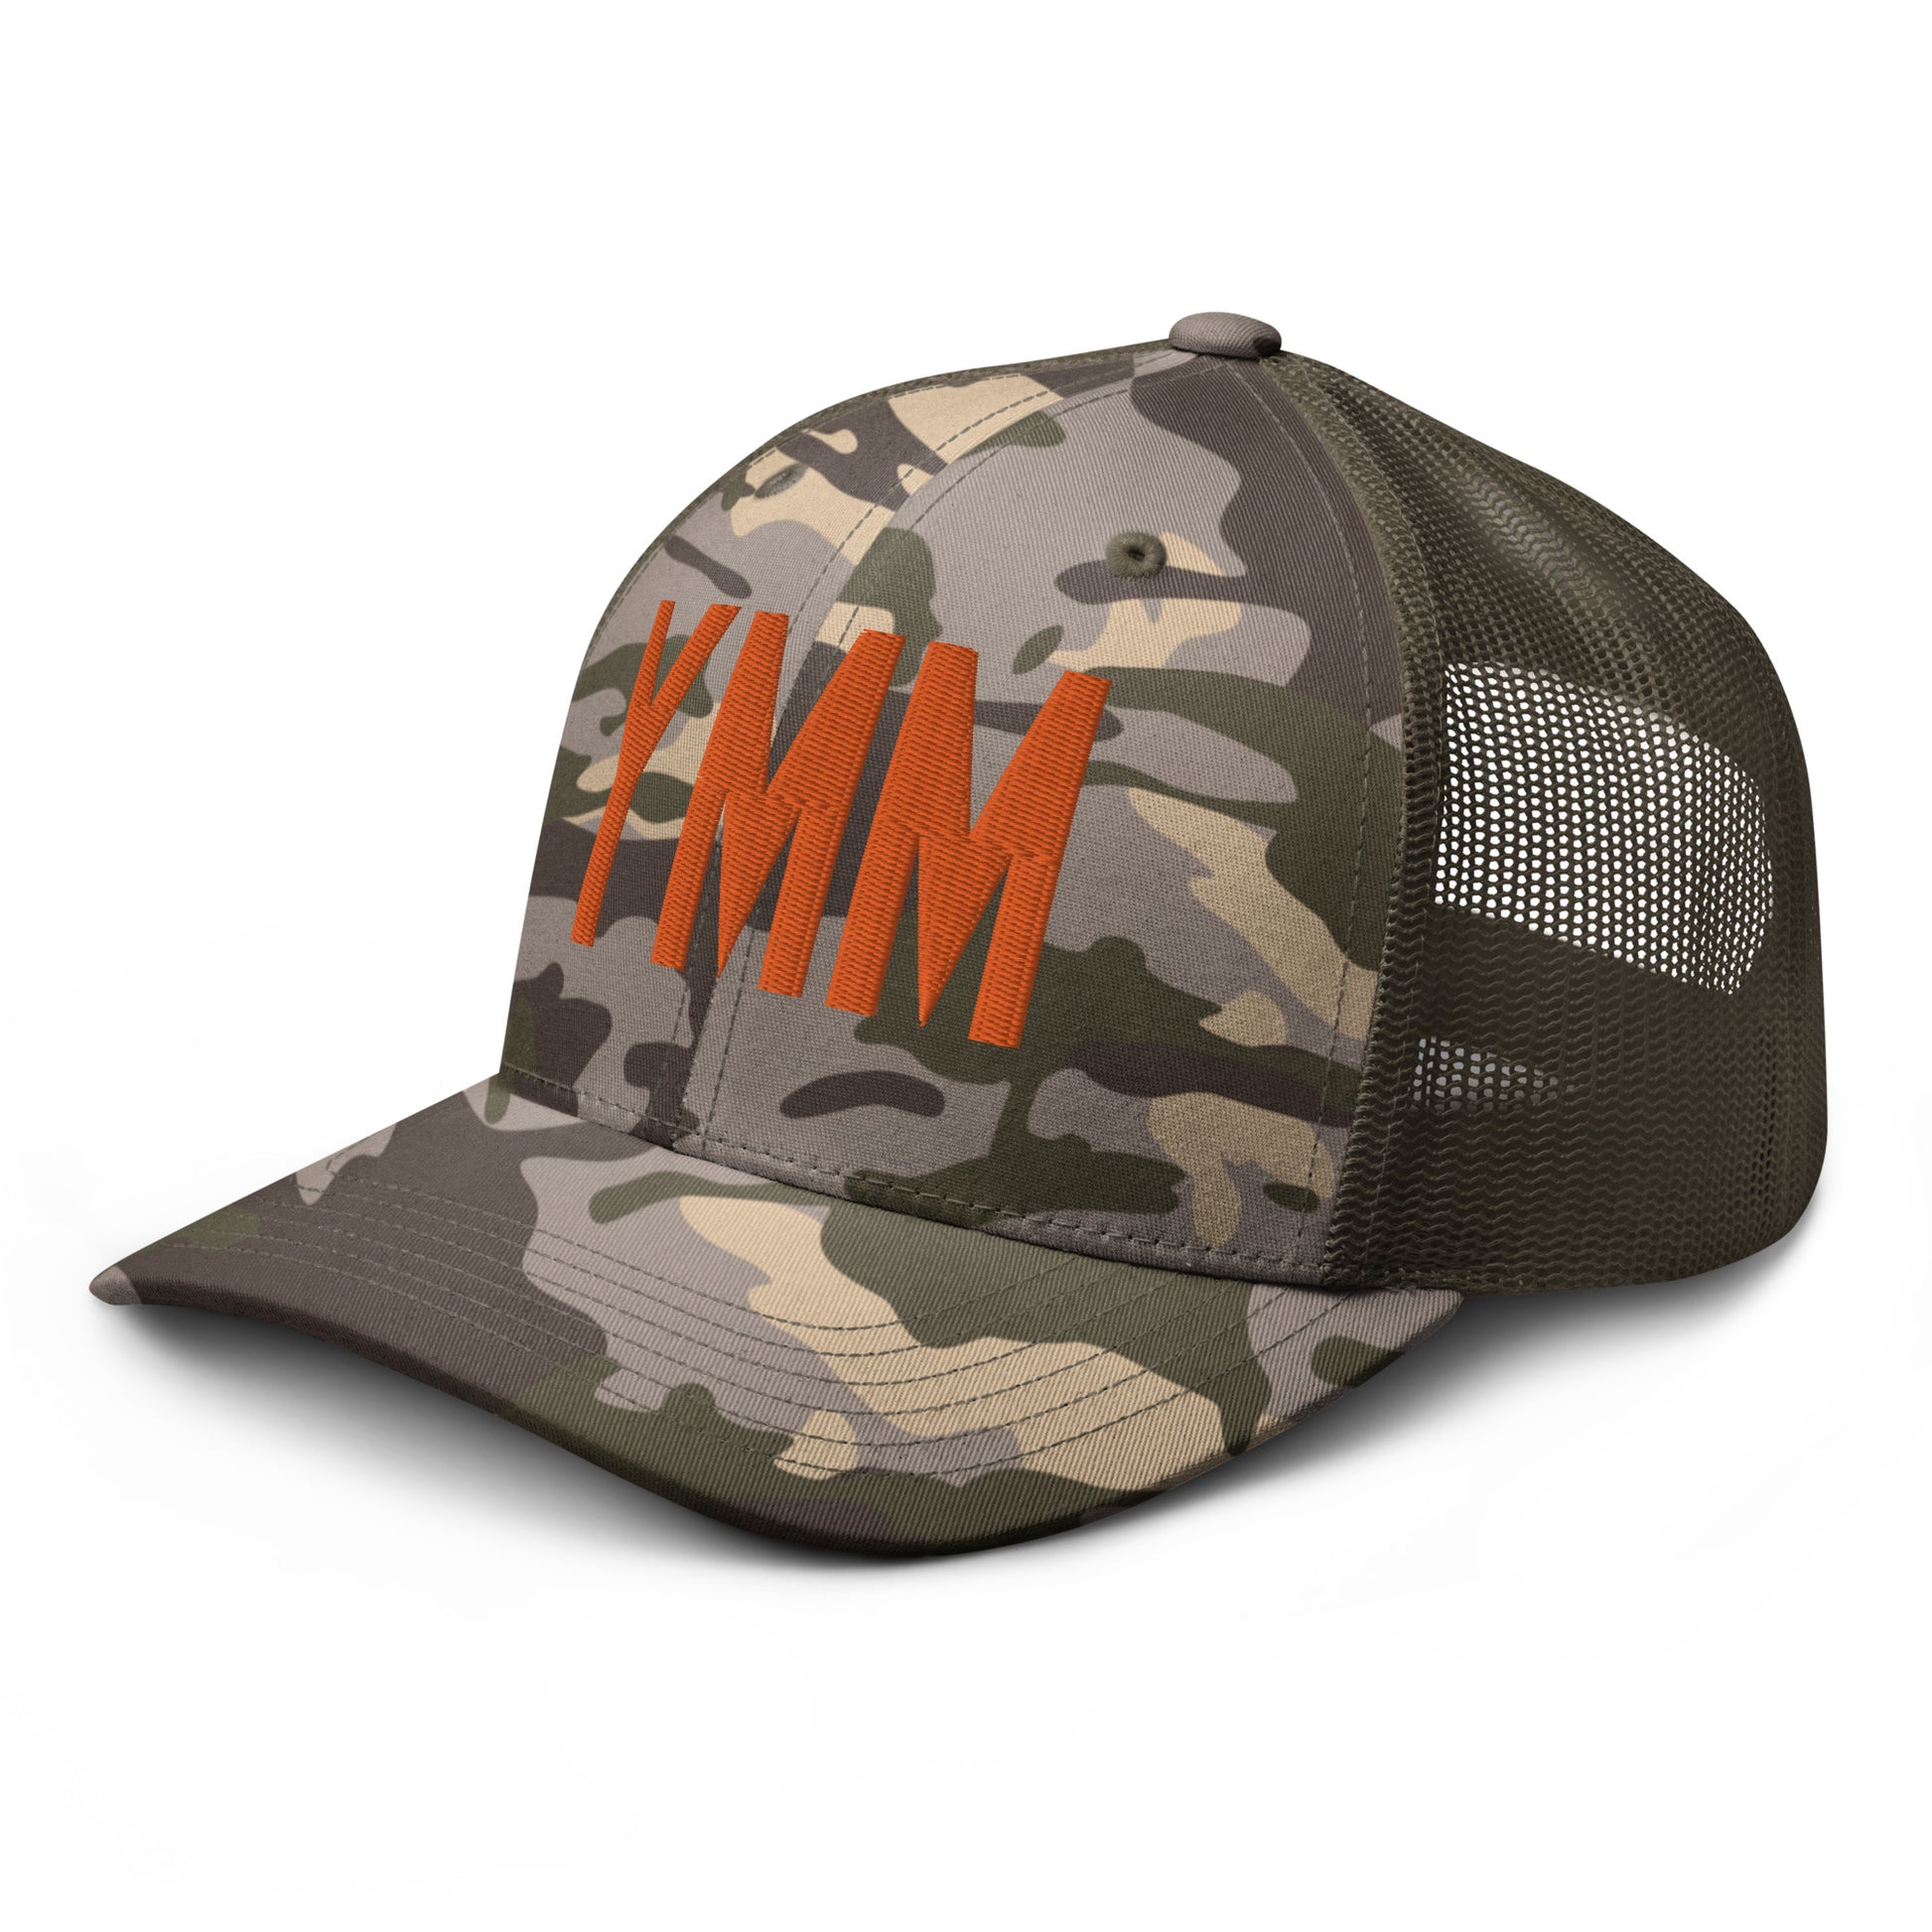 Airport Code Camouflage Trucker Hat - Orange • YMM Fort McMurray • YHM Designs - Image 19